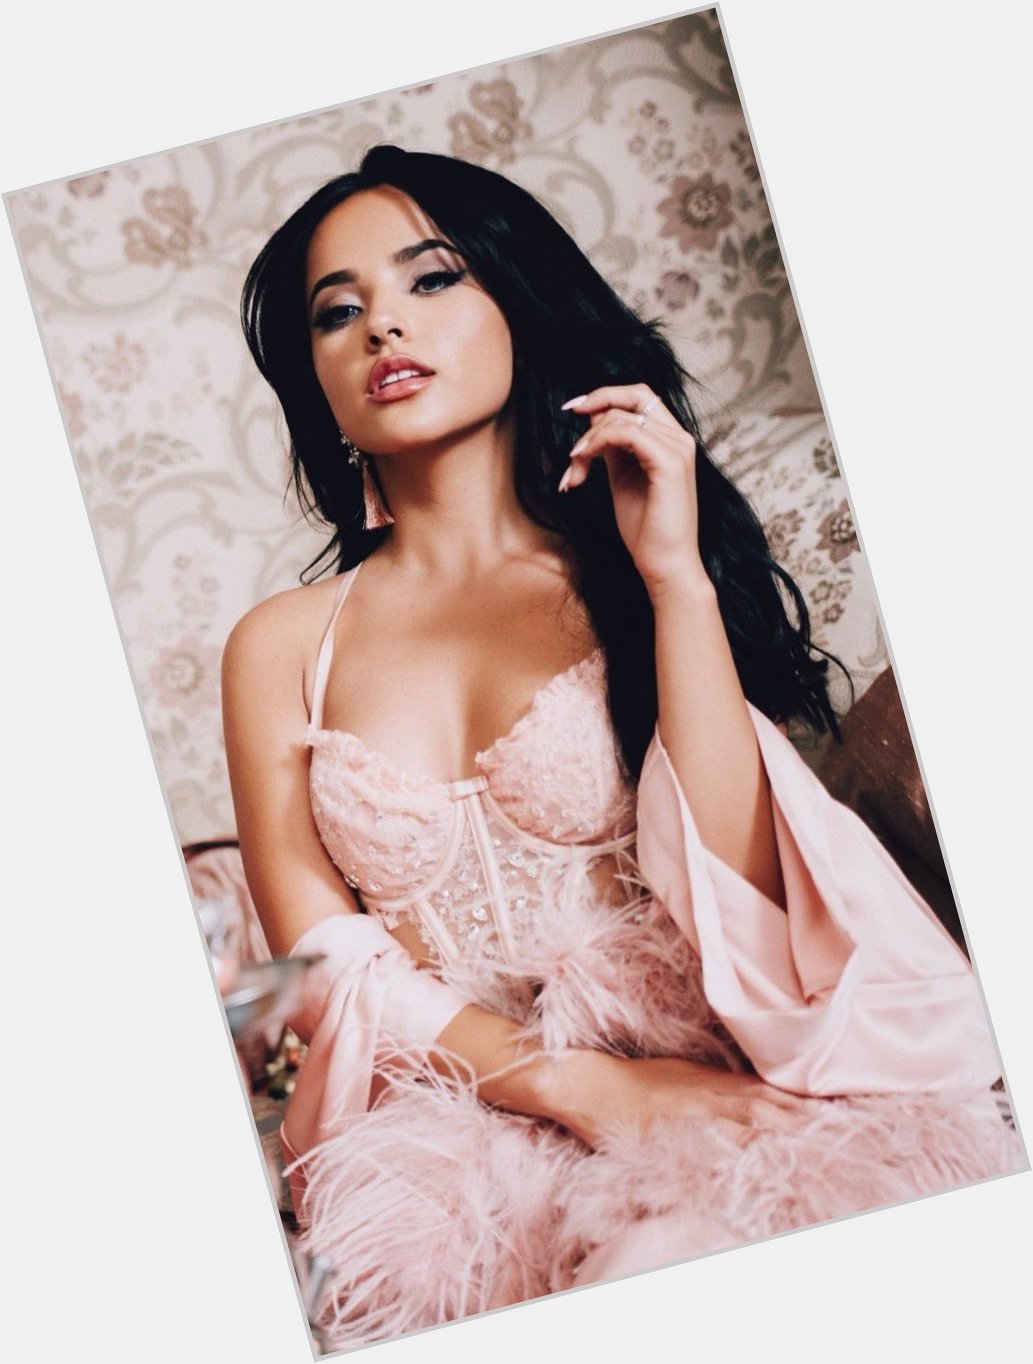 Happy belated 23rd birthday to Becky G 